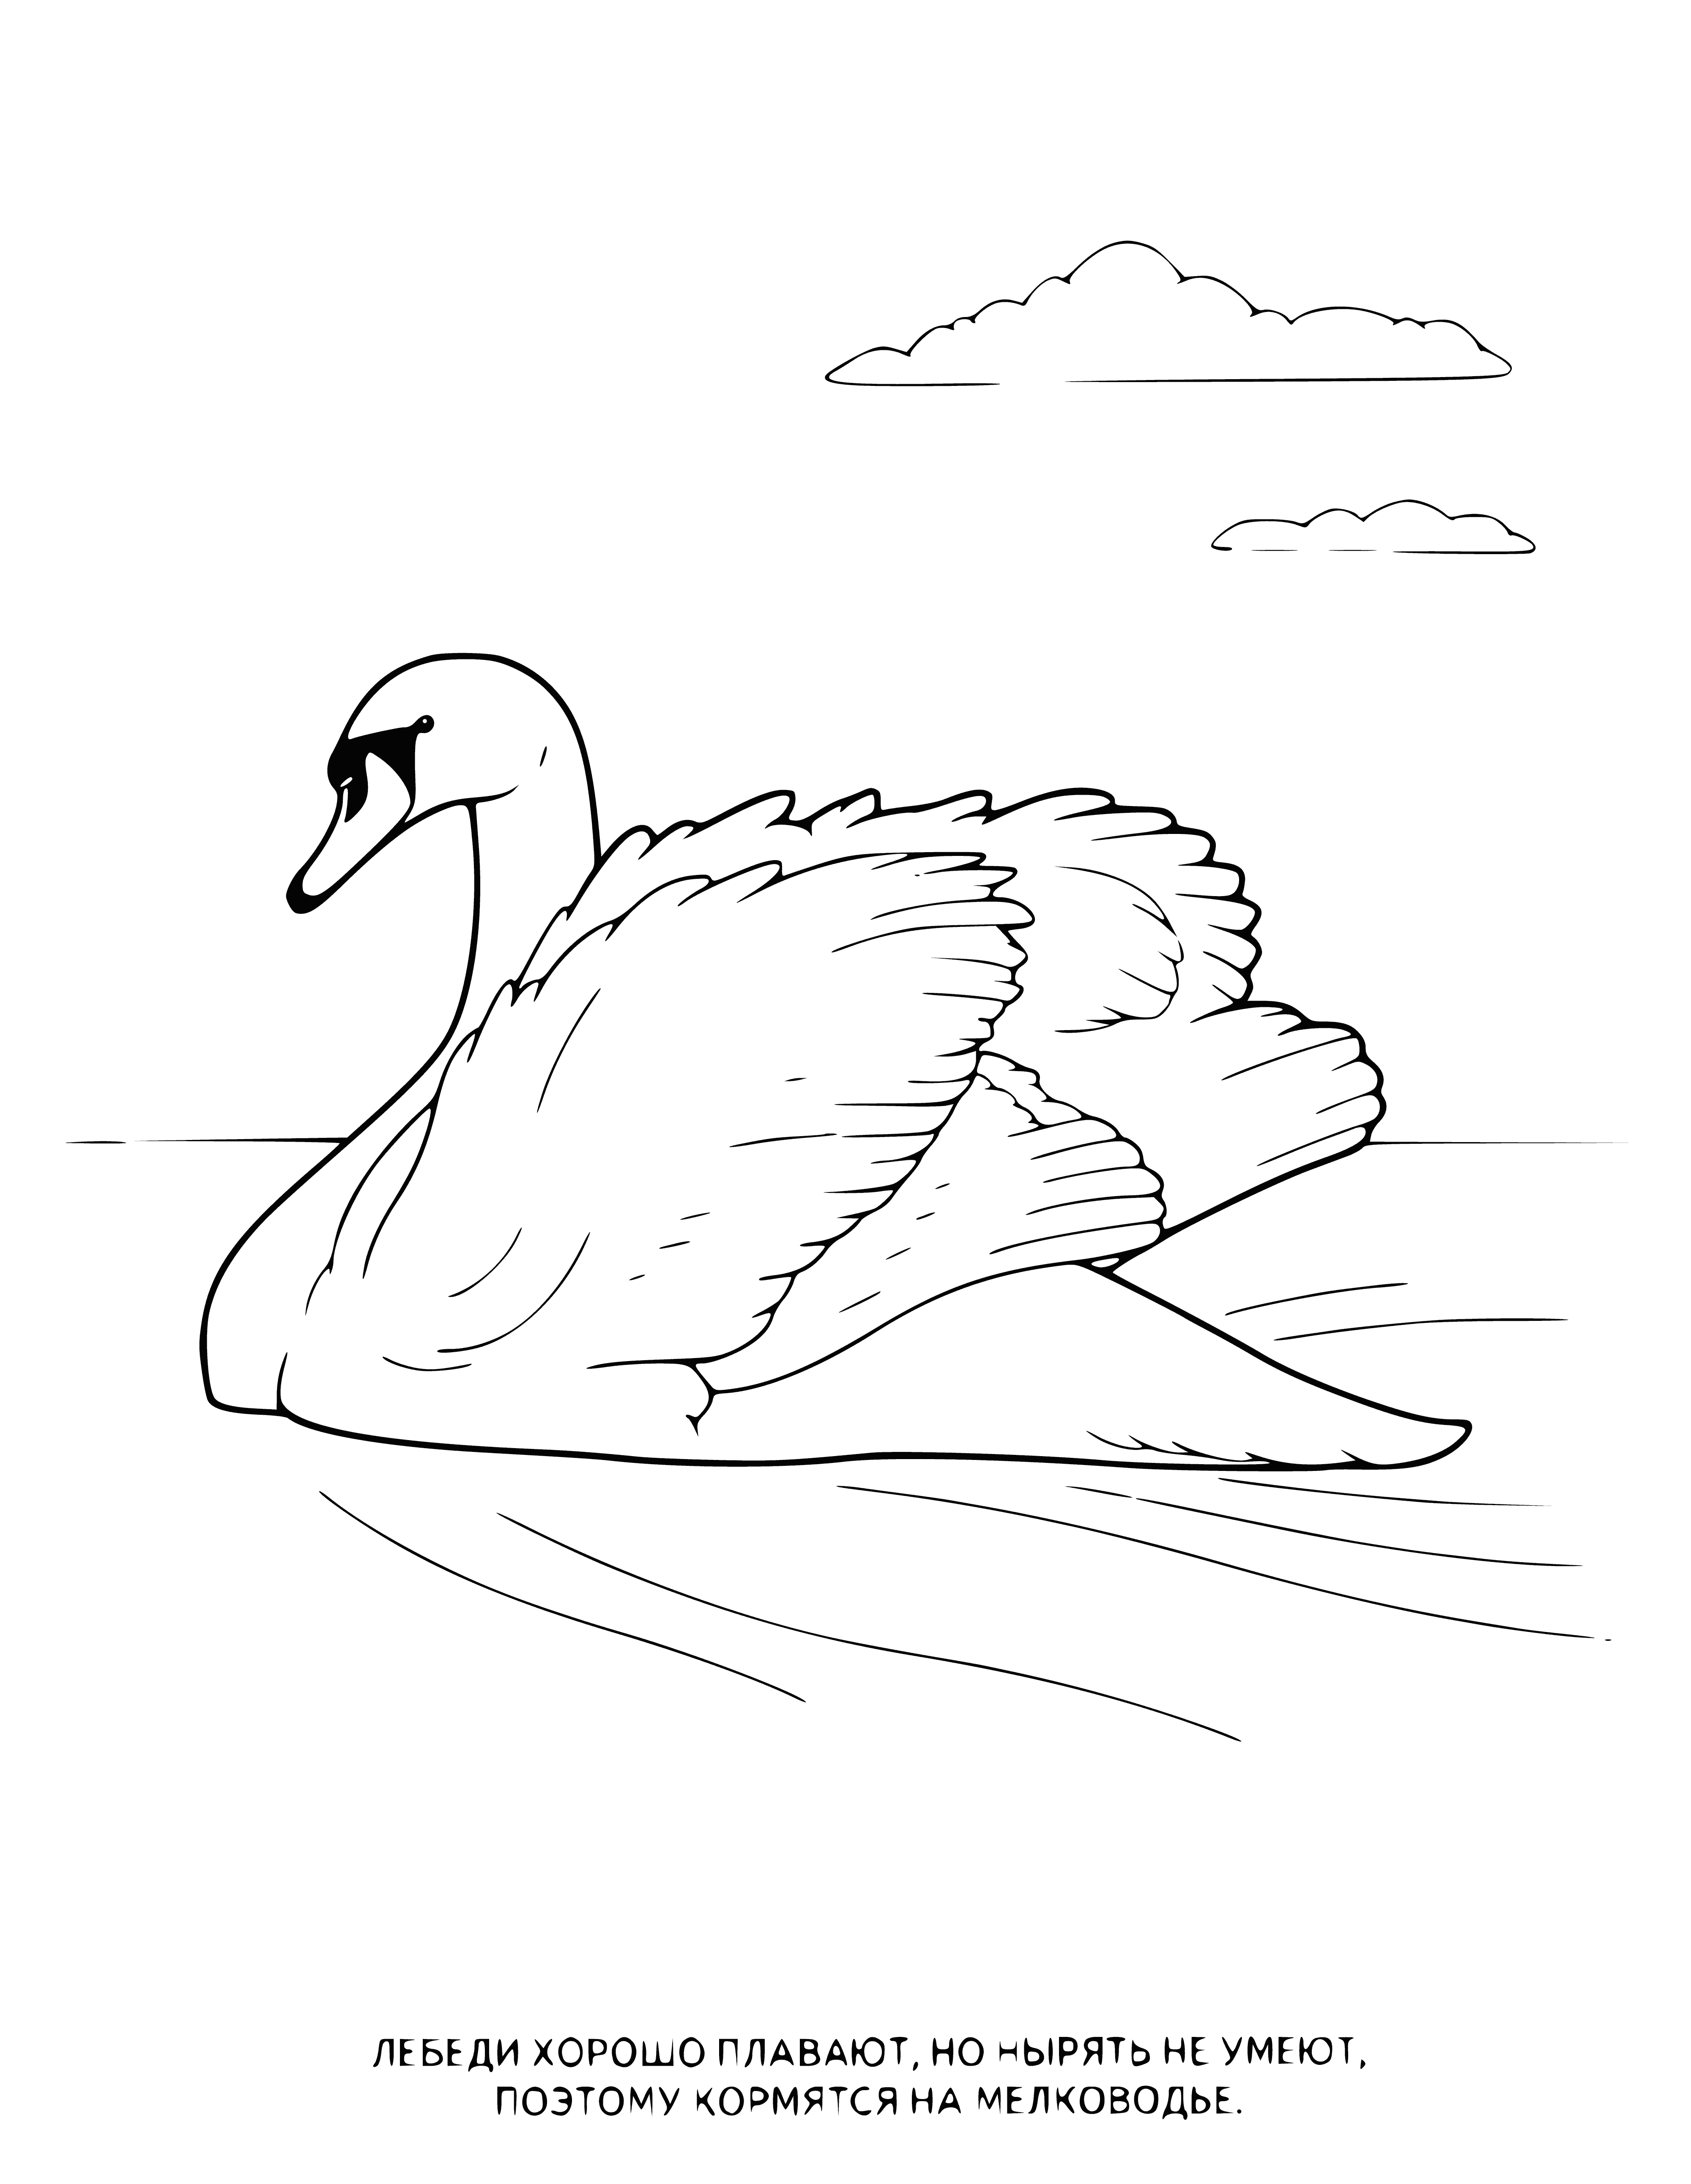 coloring page: Beautiful white swan gracefully gliding through the water with long neck and large wings.